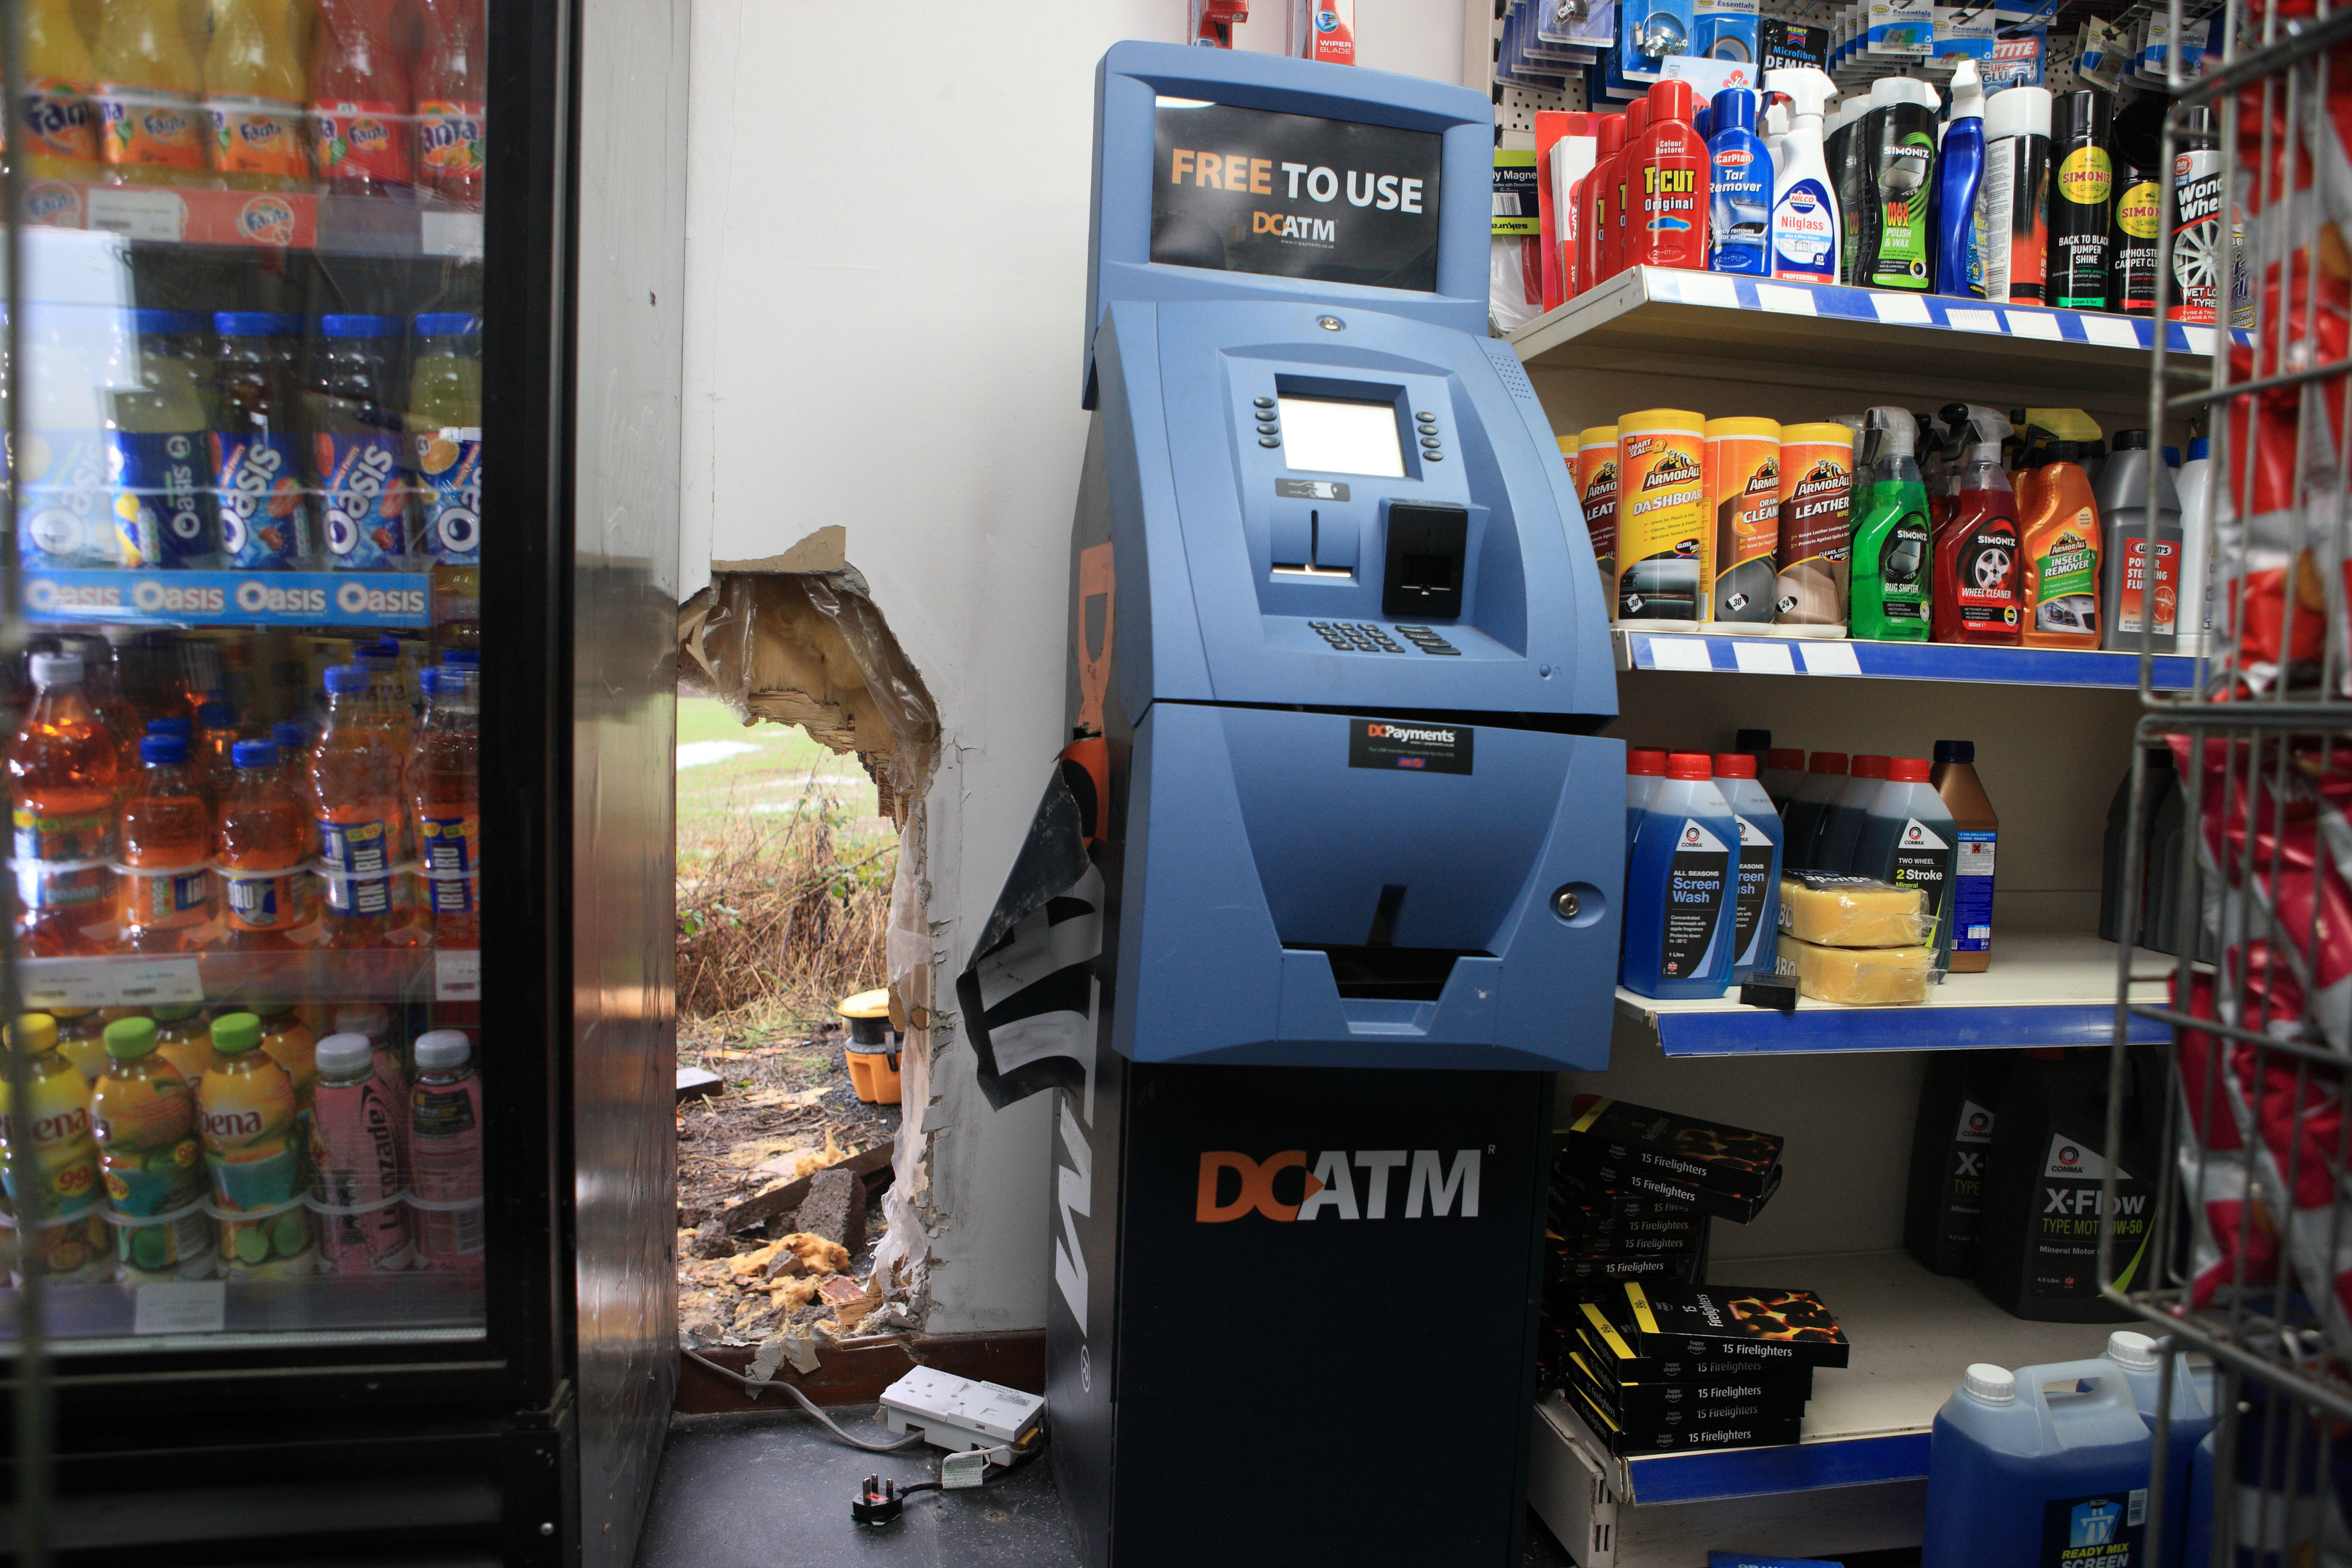 Damage to the Jet garage premises near Almondbank, aftre the ATM was targeted by thieves in January.